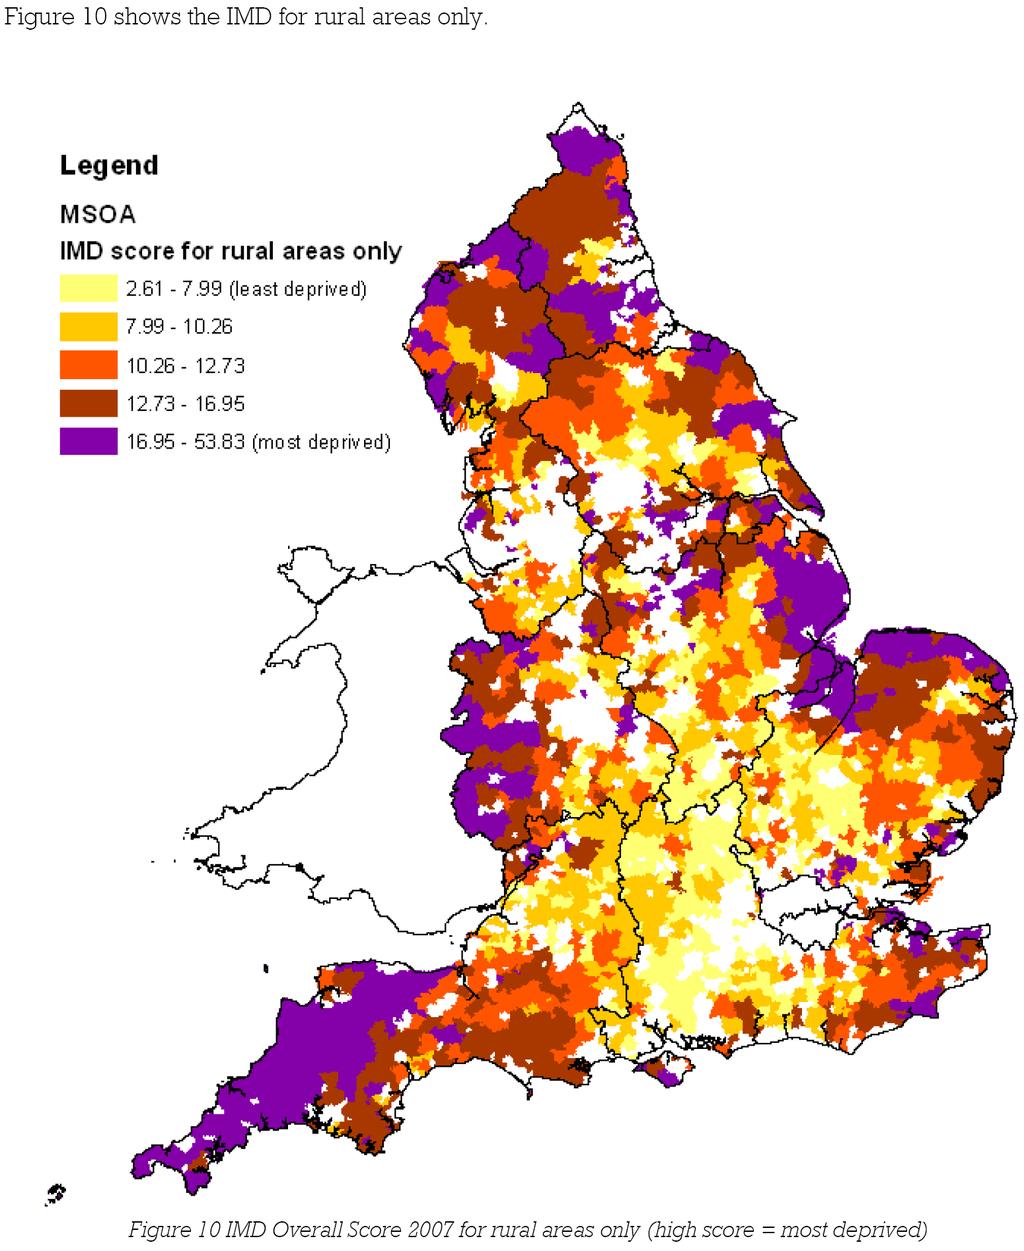 It is apparent that mst areas defined as sparse have high levels f deprivatin, as d frmer mining areas in areas such as the Nrth East, Yrkshire and the Humber and the East Midlands, as well as sme